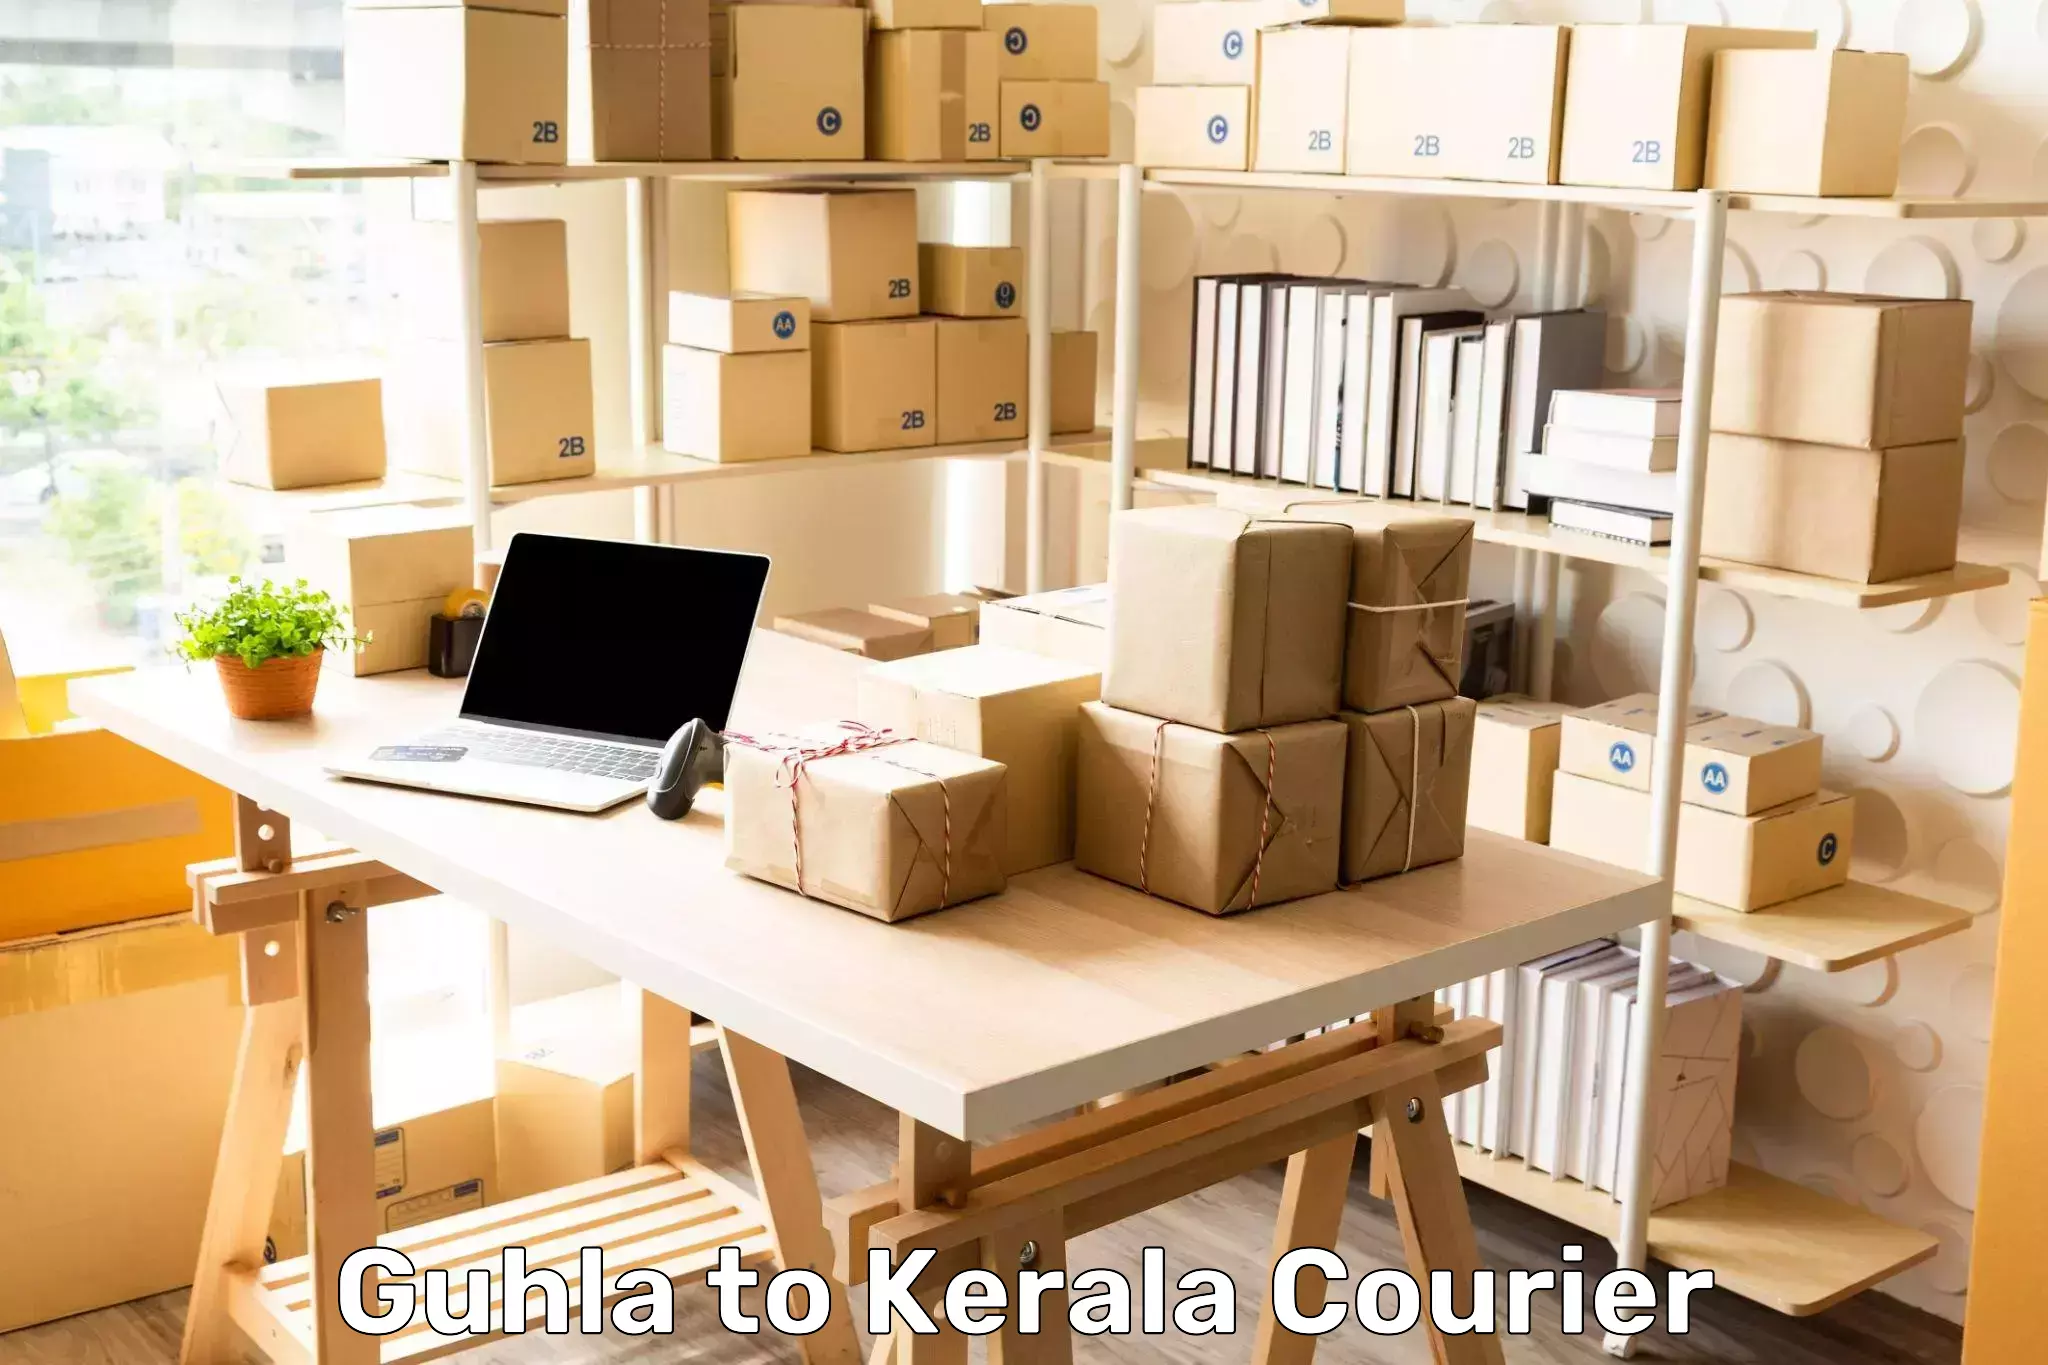 Same-day delivery solutions Guhla to Kerala